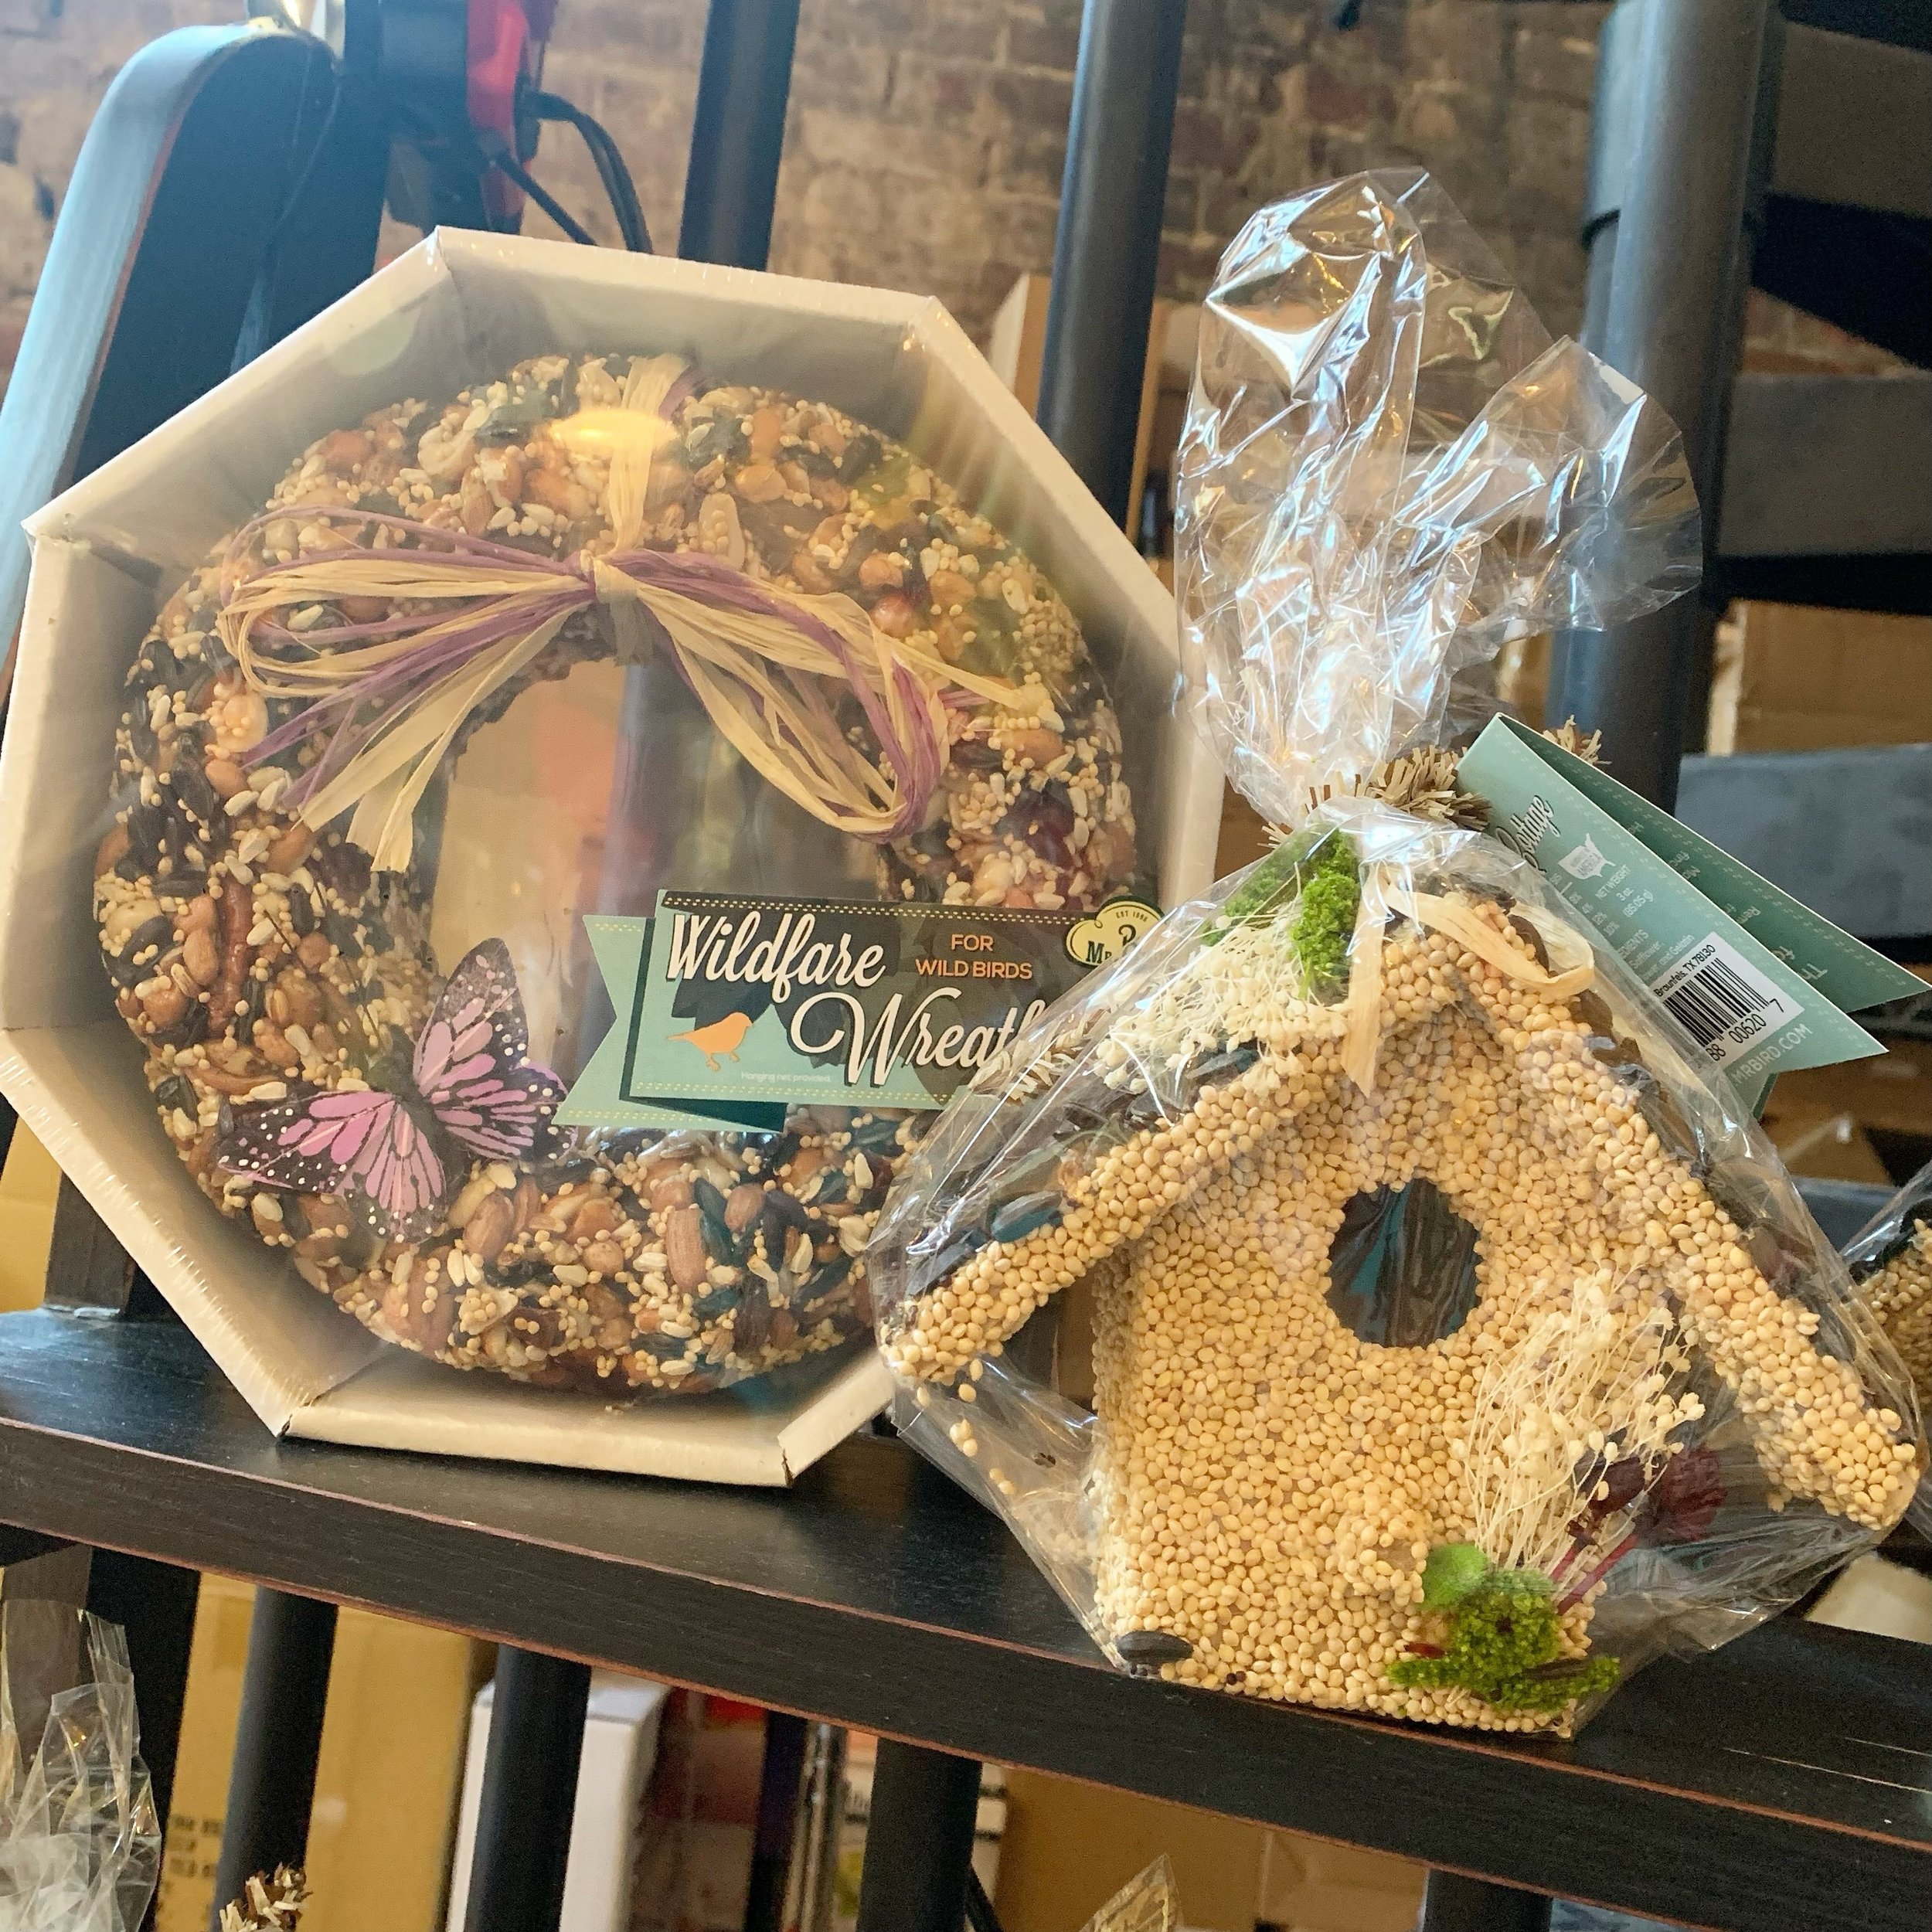 Tomorrow is National Bird Day! Celebrate our feathered friends with one of these gorgeous wreaths or birdhouses made from nuts and seeds! Birds absolutely love them and you&rsquo;re sure to lure some beauties into your yard! 🐦

These would also make